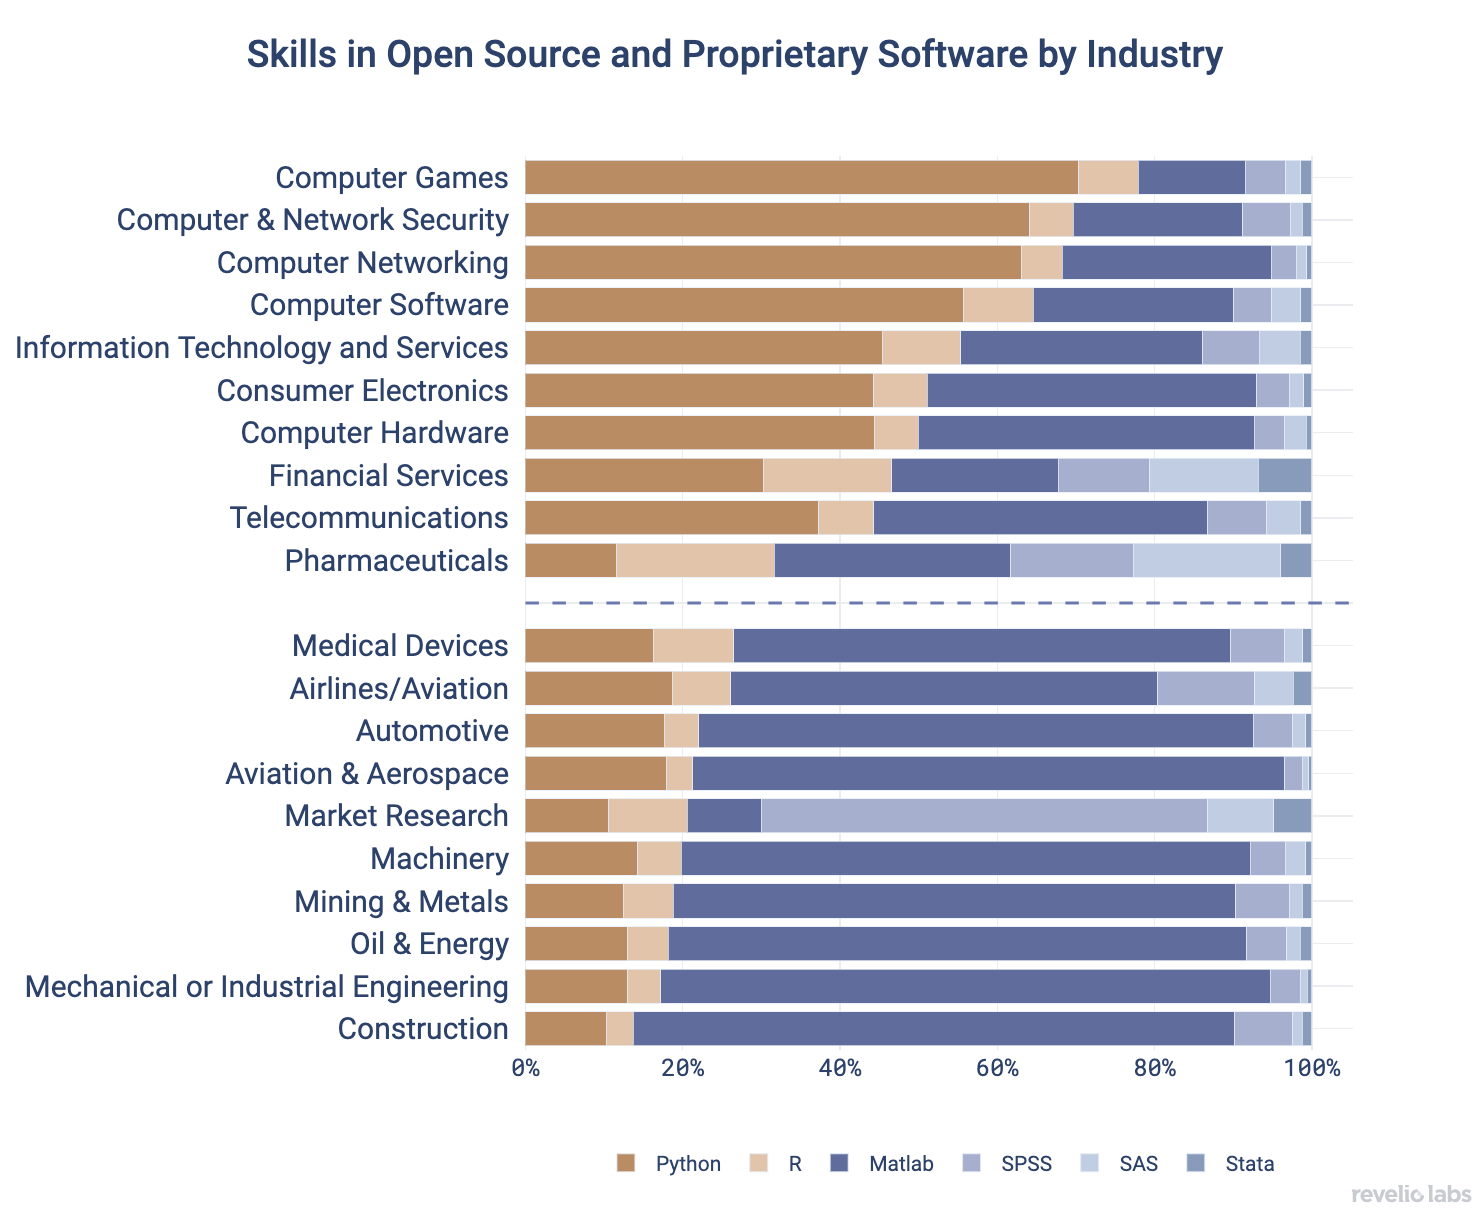 Skills in Open Source and Proprietary Software by Industry